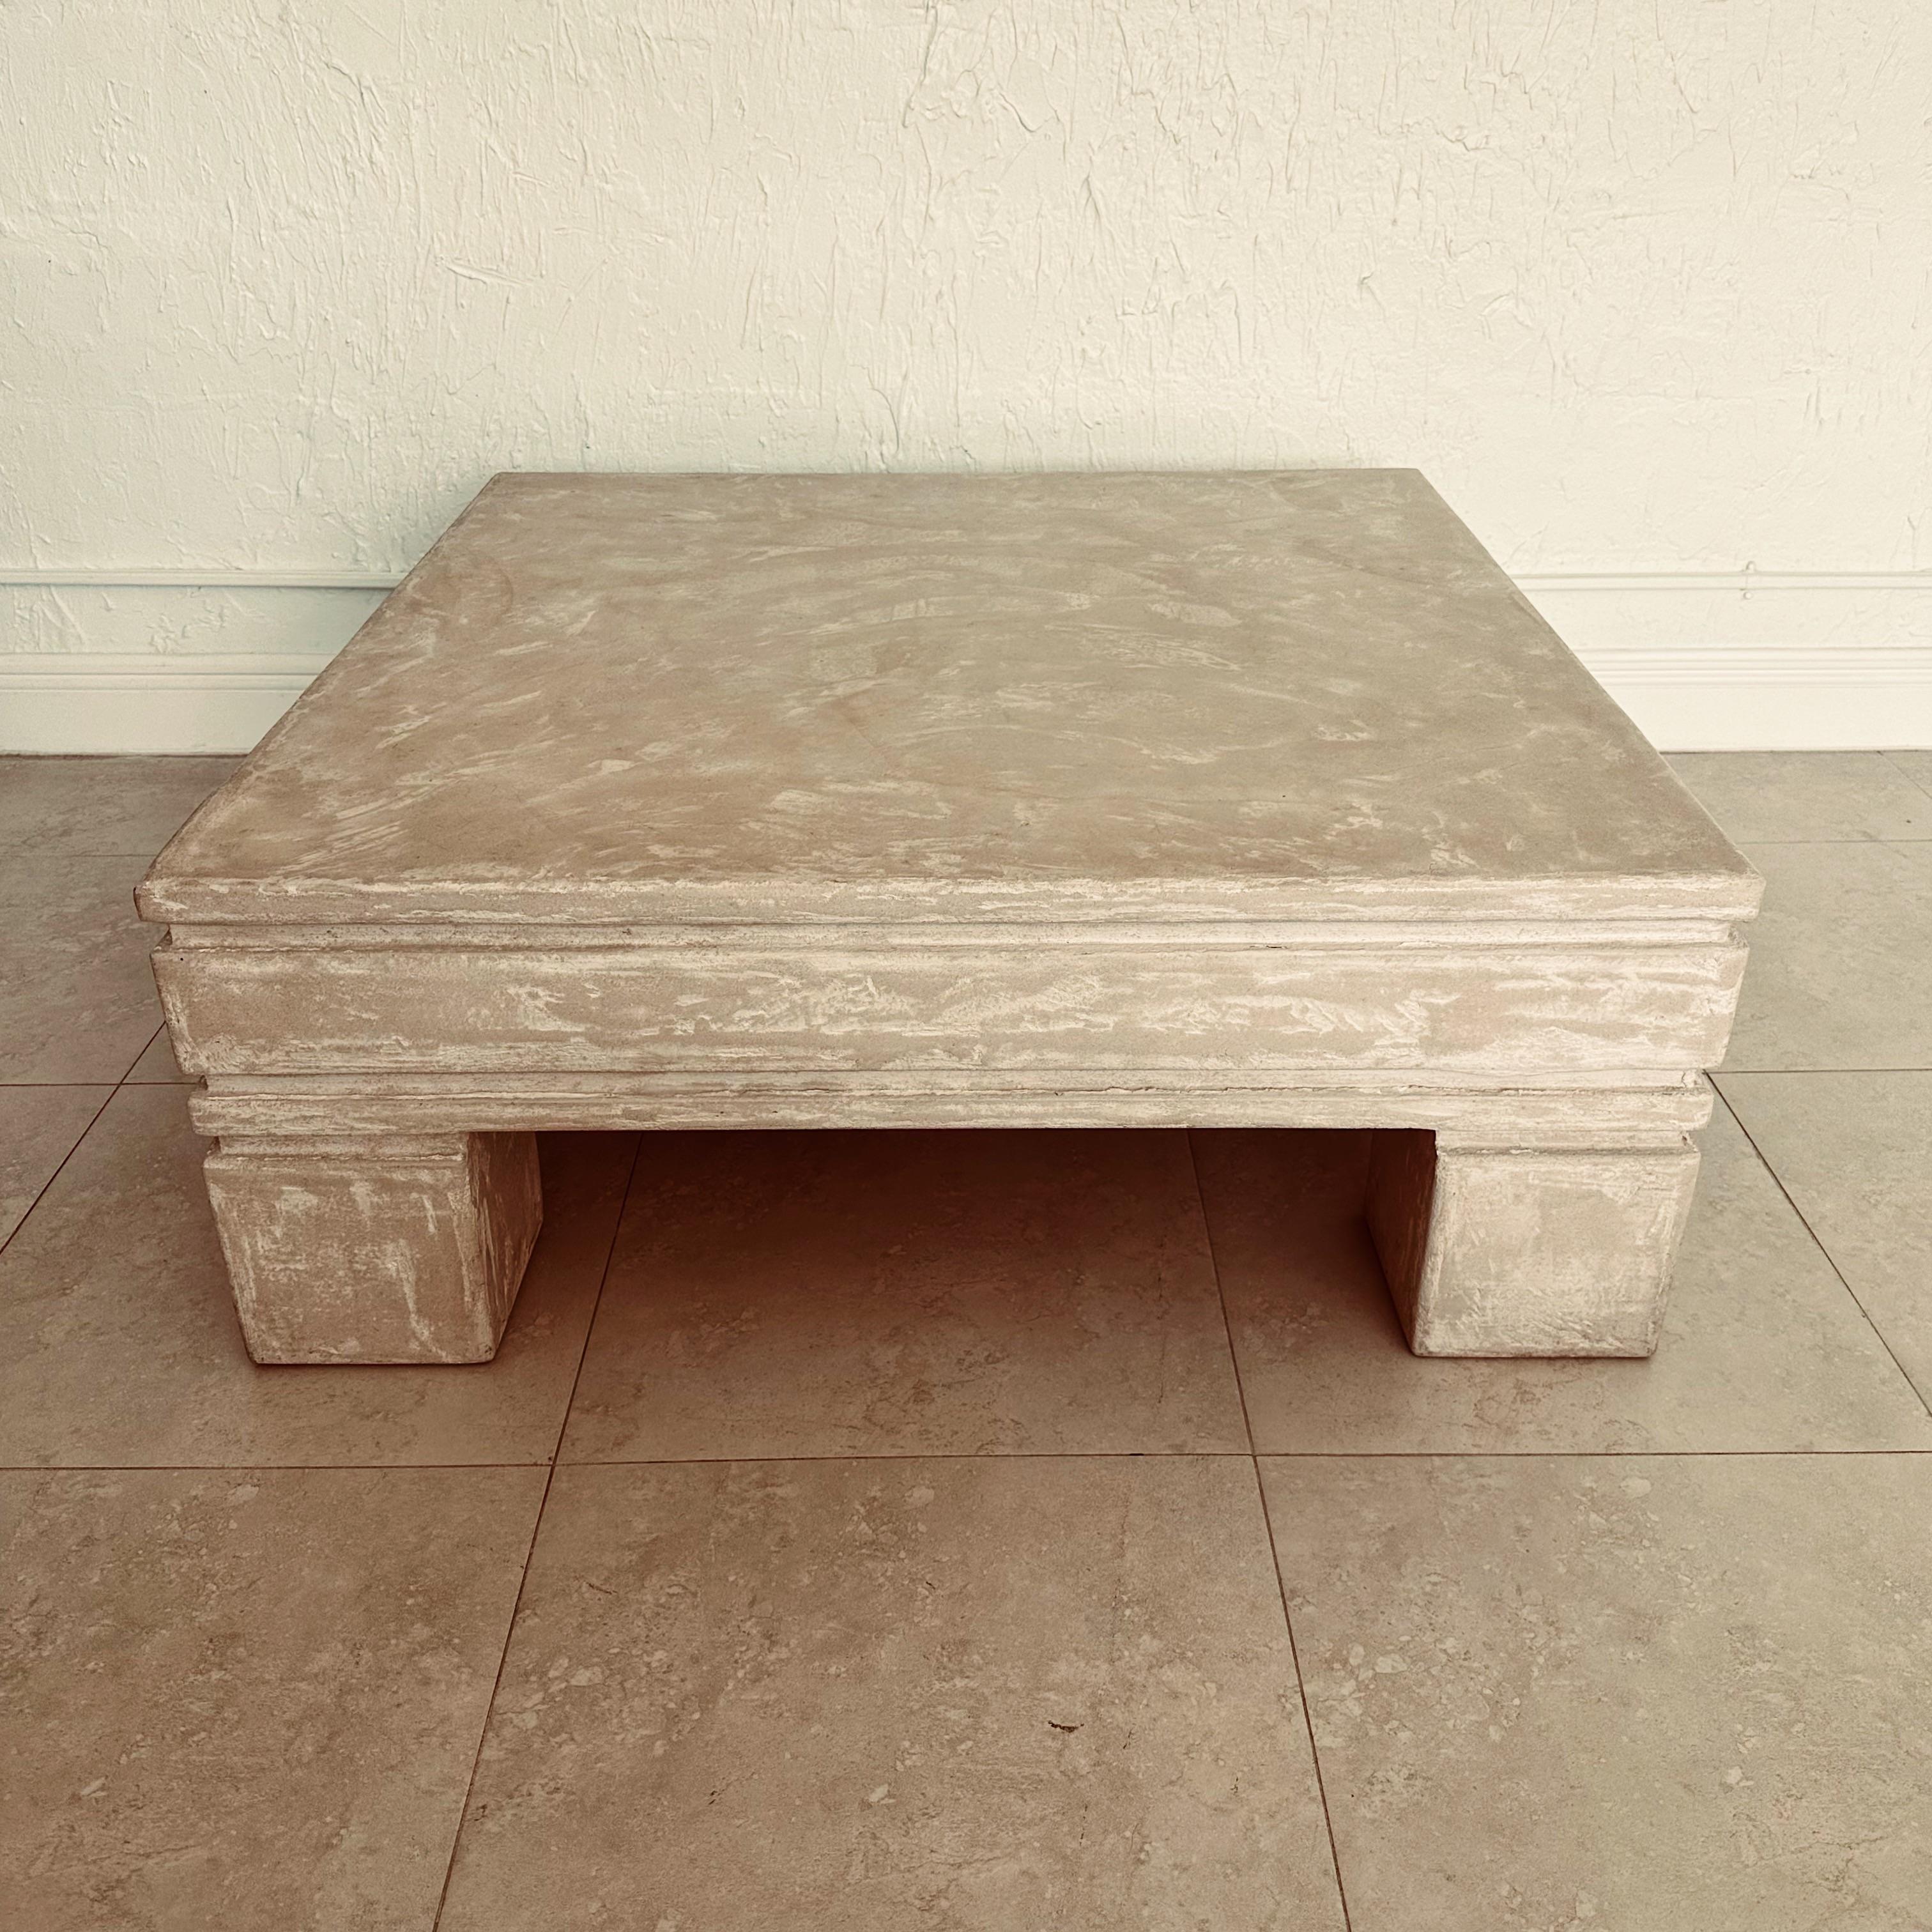 Vintage four legged organic square coffee table with textured plaster over wood from the 1980's. In the style of Michael Taylor. Unsigned.